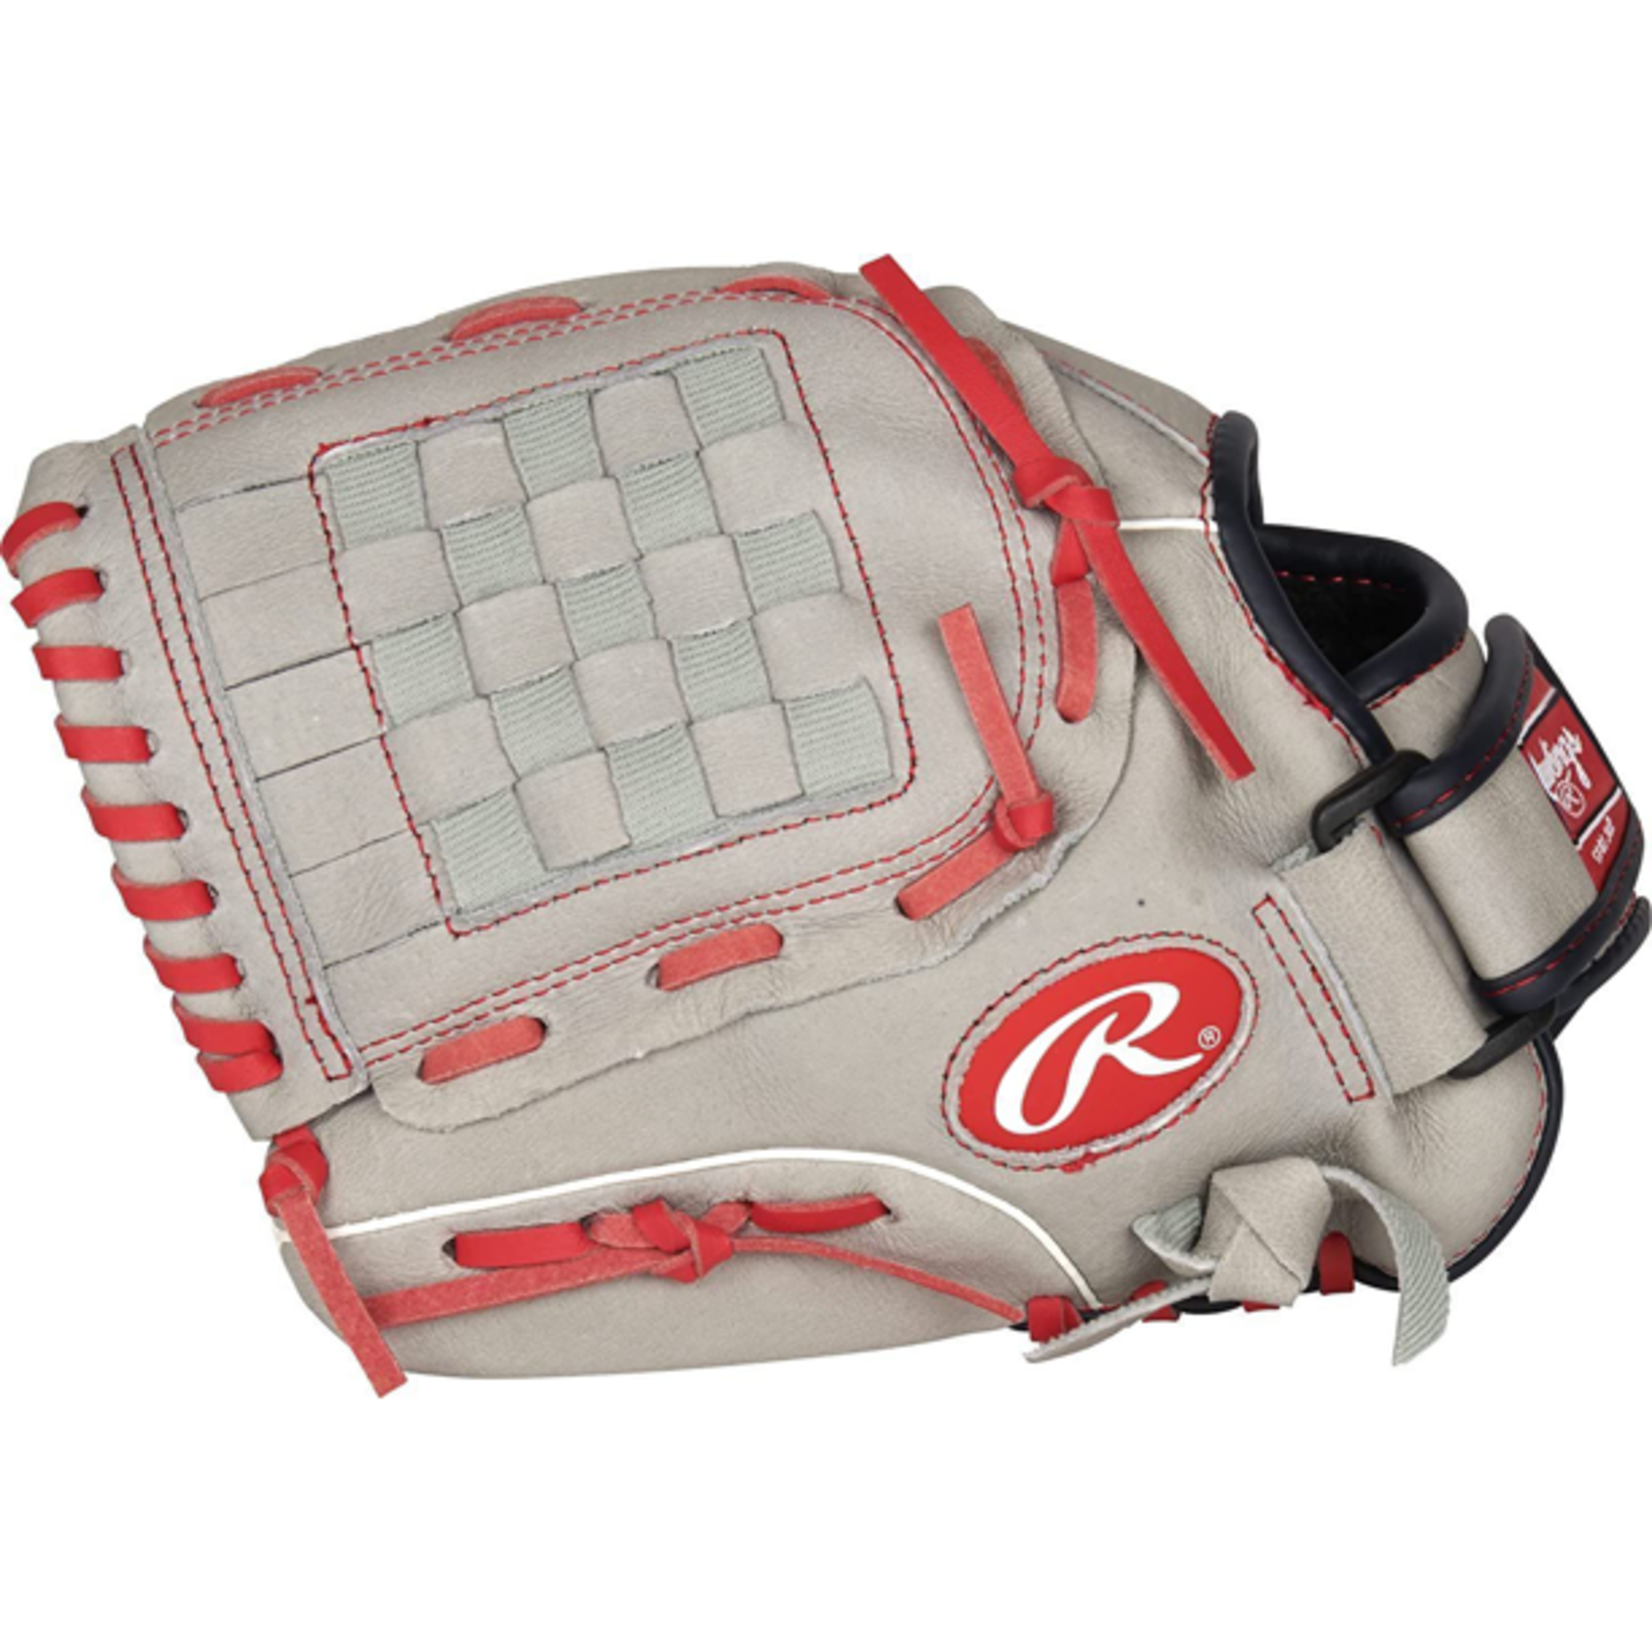 Rawlings Rawlings Baseball Glove, Sure Catch Series, SC110MT, 11”, Full Right, Youth